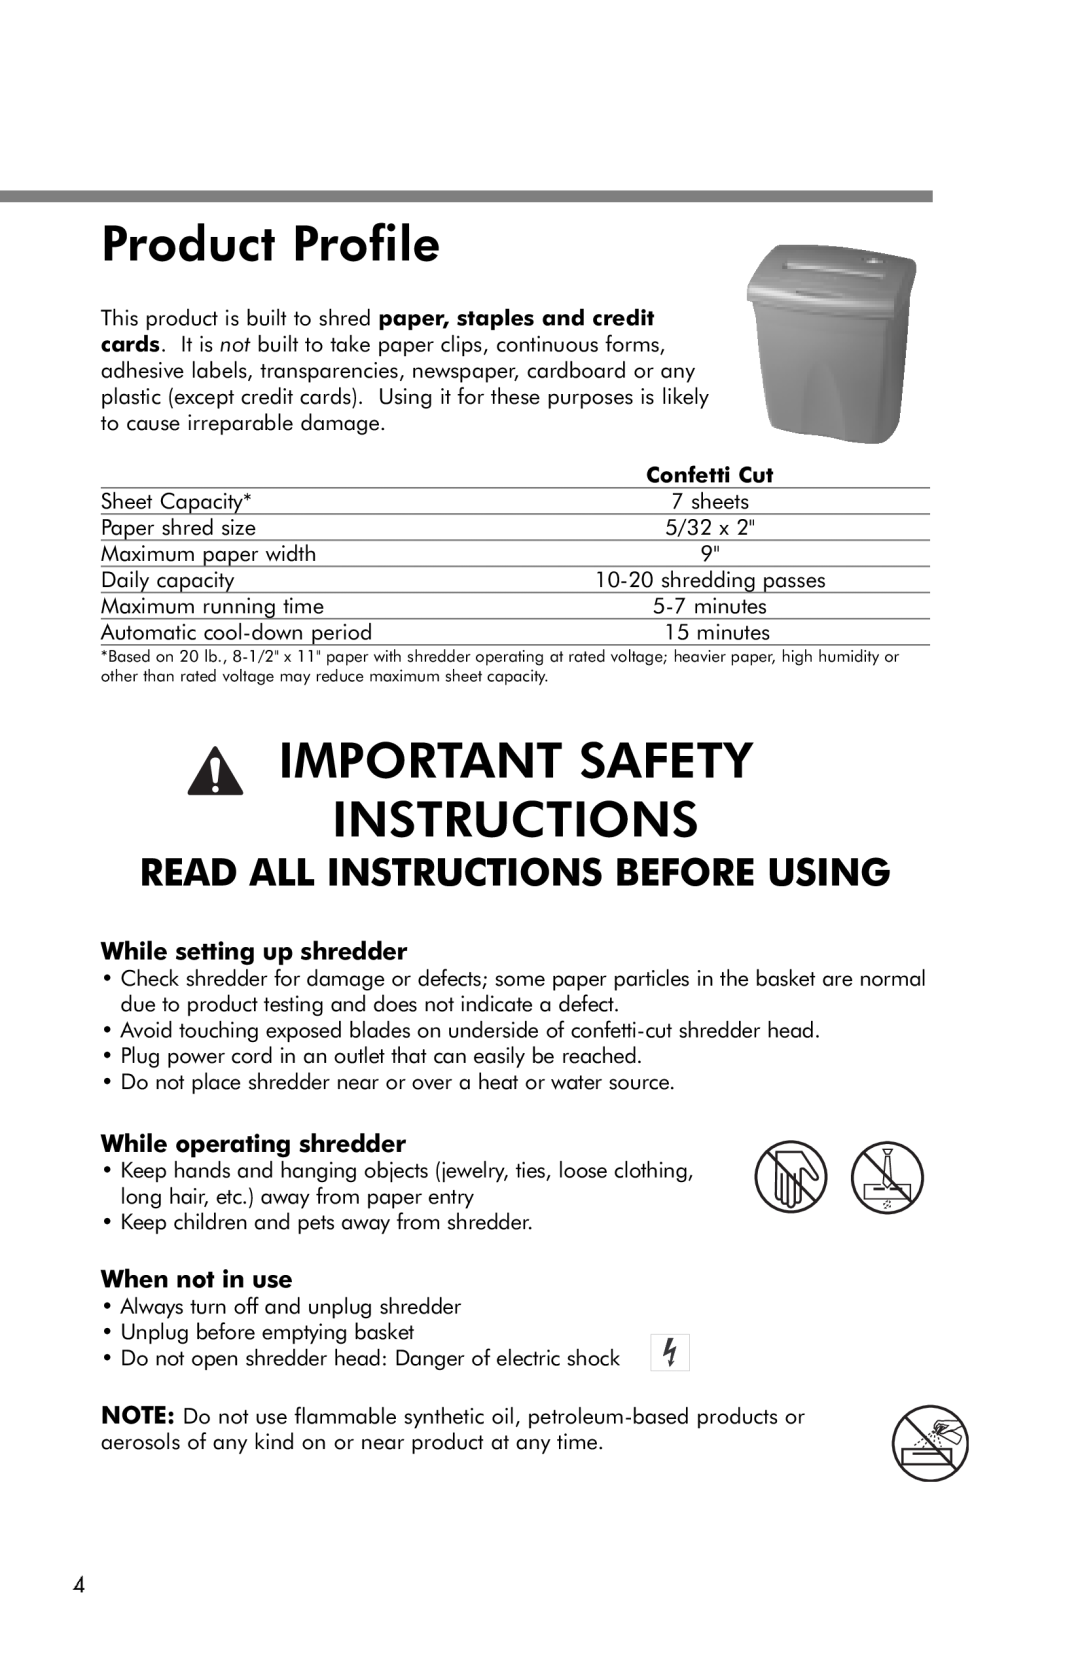 Fellowes T440C manual Product Profile, Important Safety Instructions, While setting up shredder, While operating shredder 